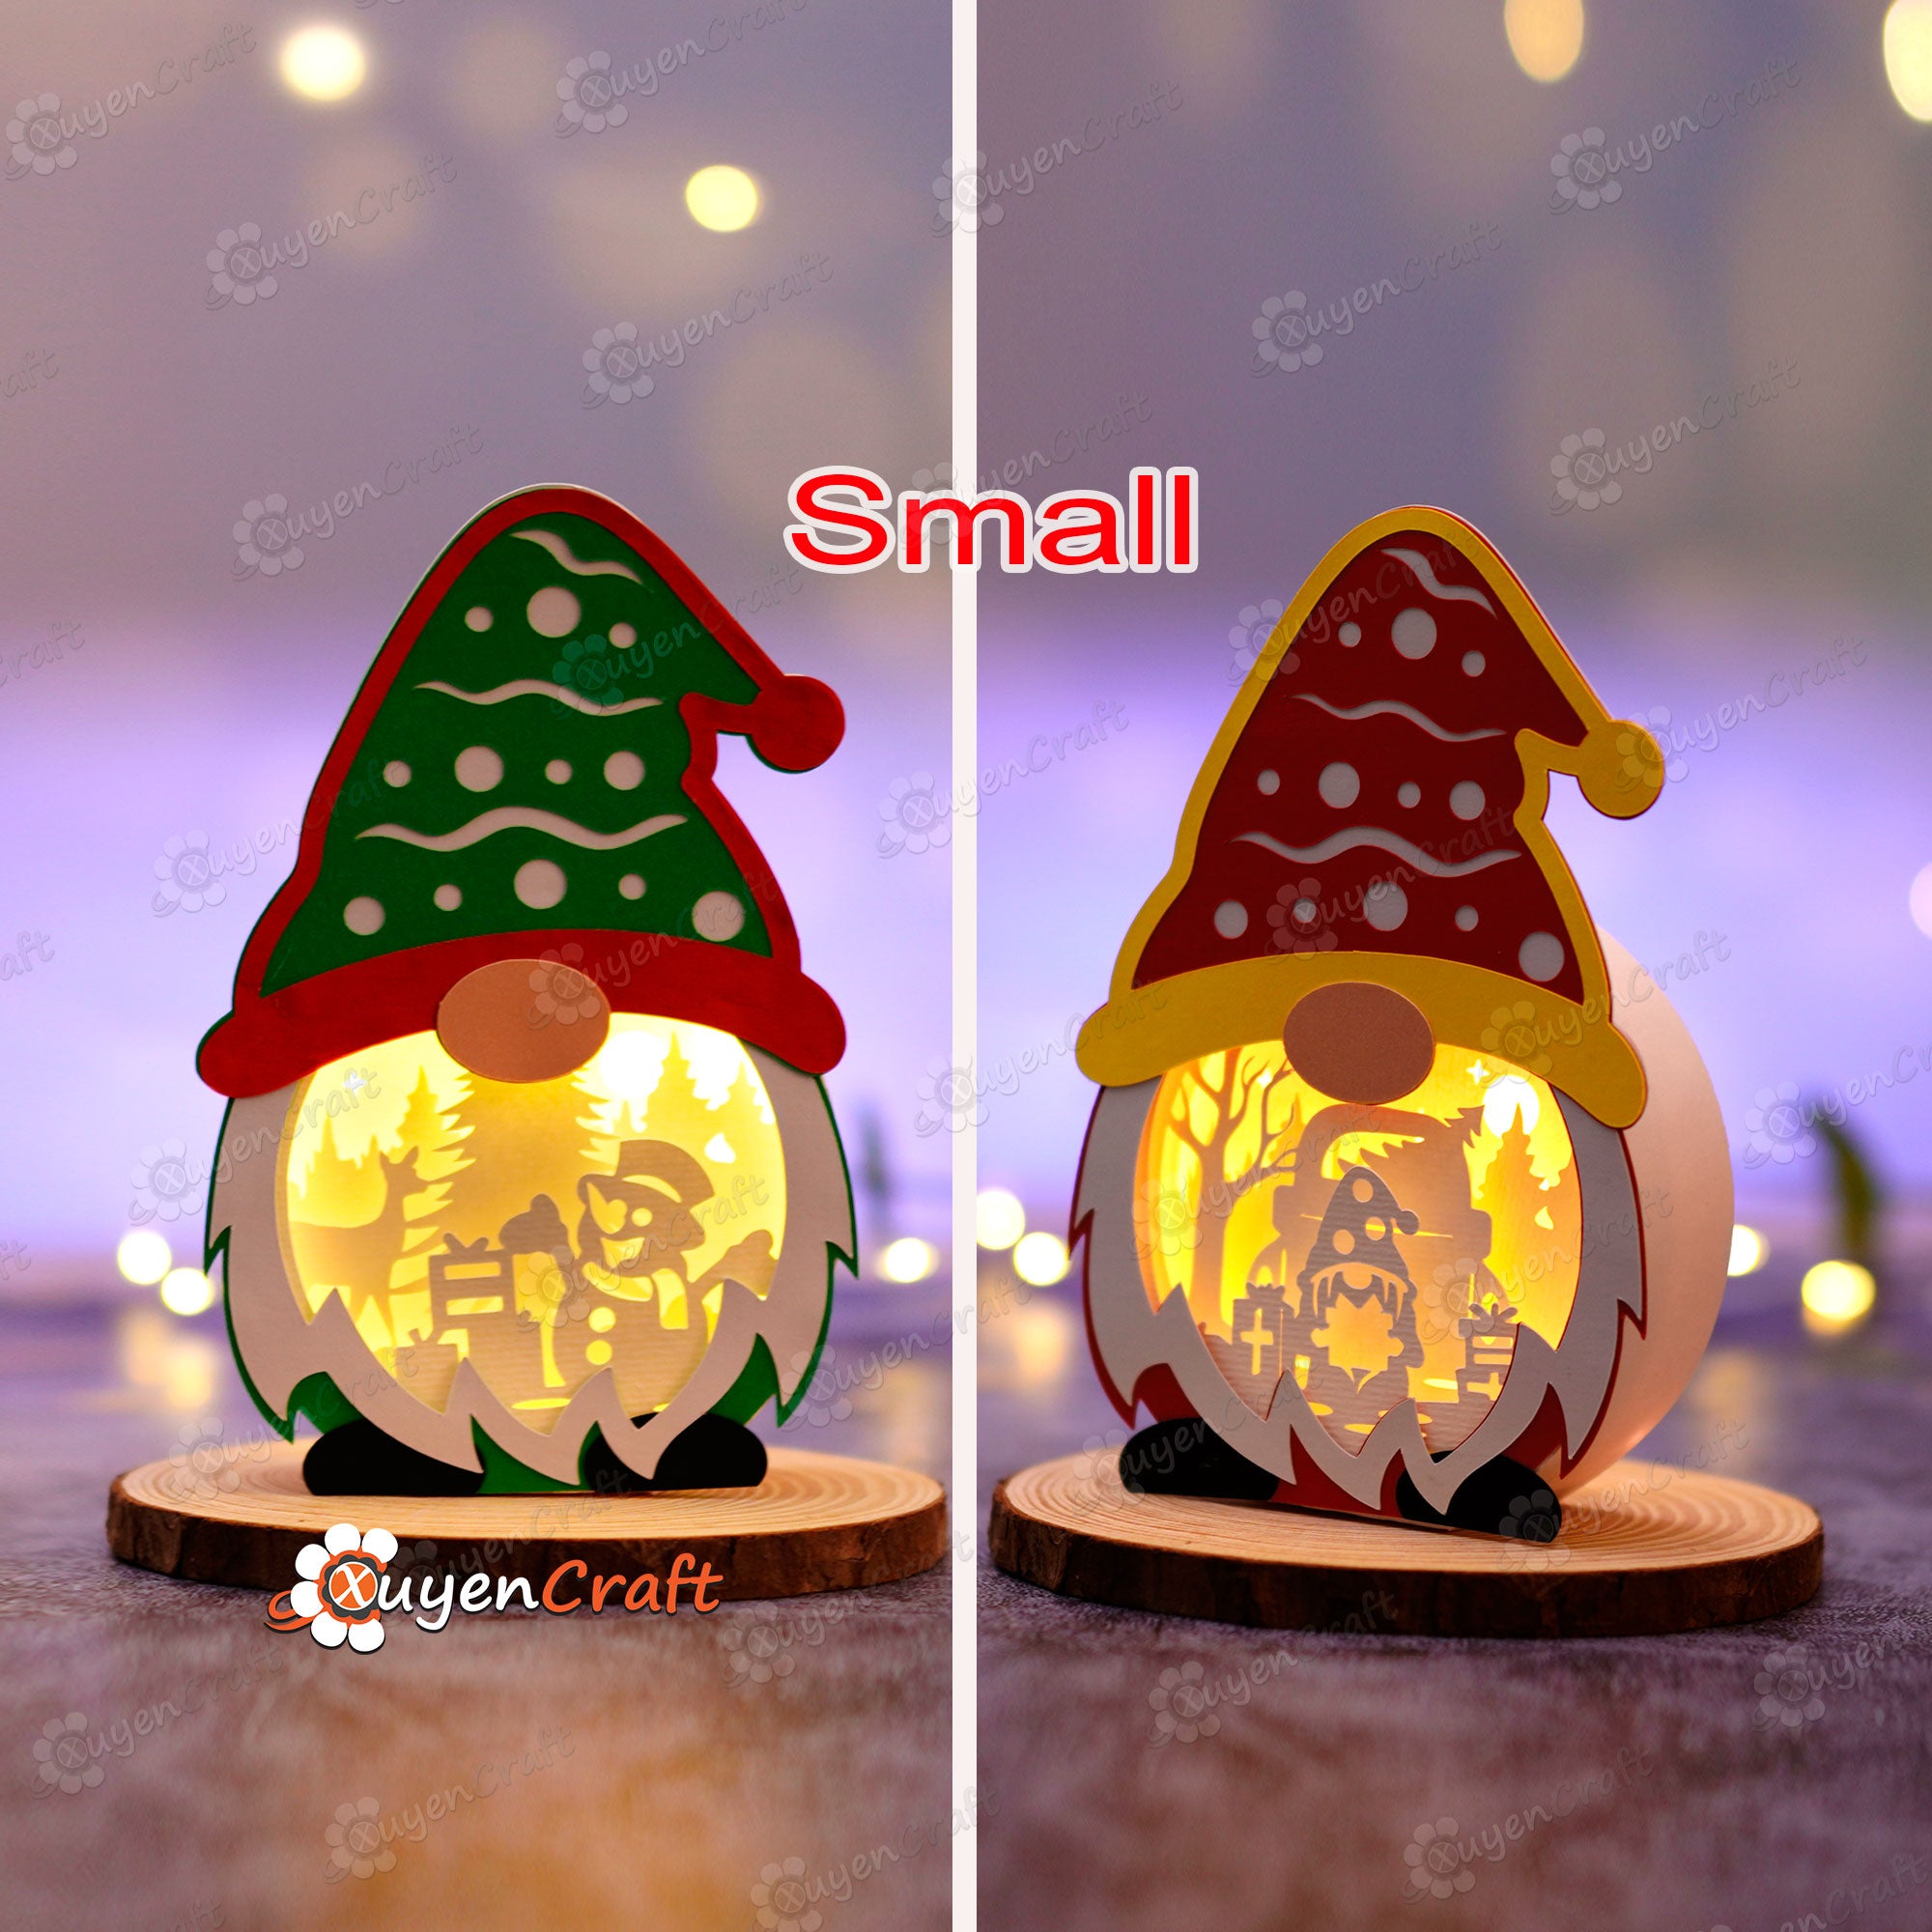 Pack 4 Christmas Small Gnome Shadow Box SVG for Cricut Joy, ScanNcut, Cameo - Merry Christmas Gnome Lantern Lightbox SVG Template Paper Cut